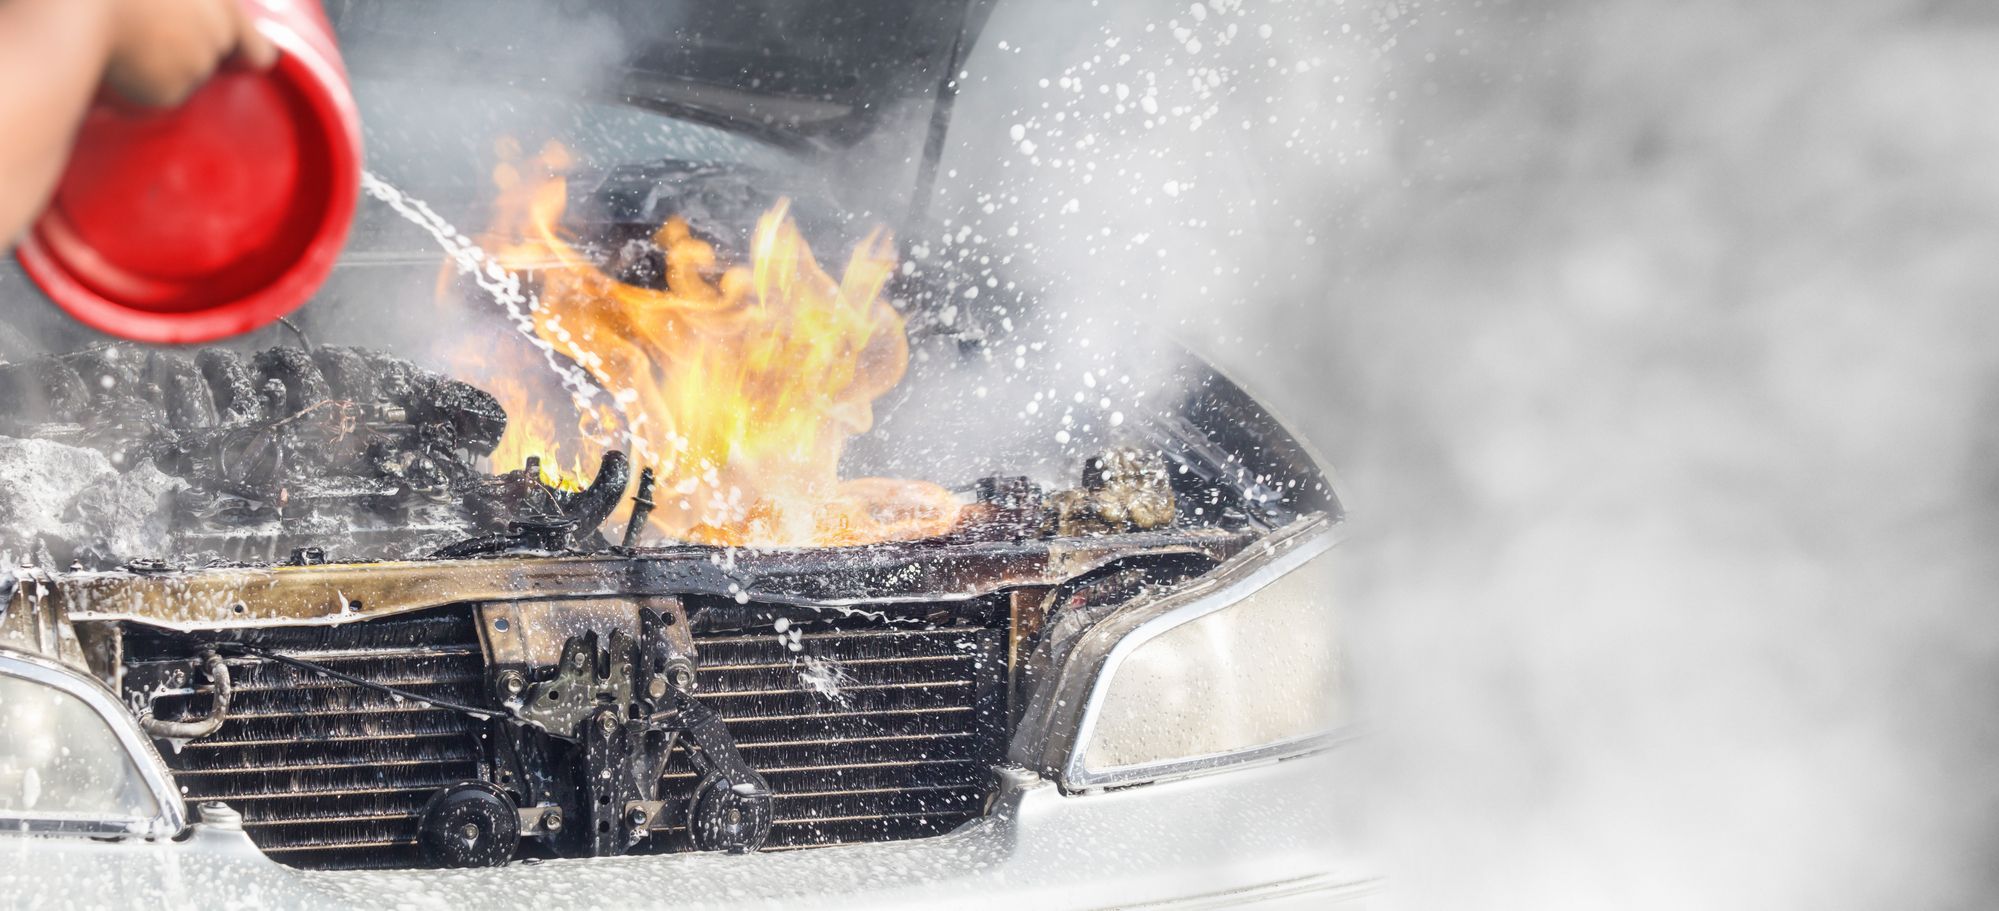 Car burning in electrical fire